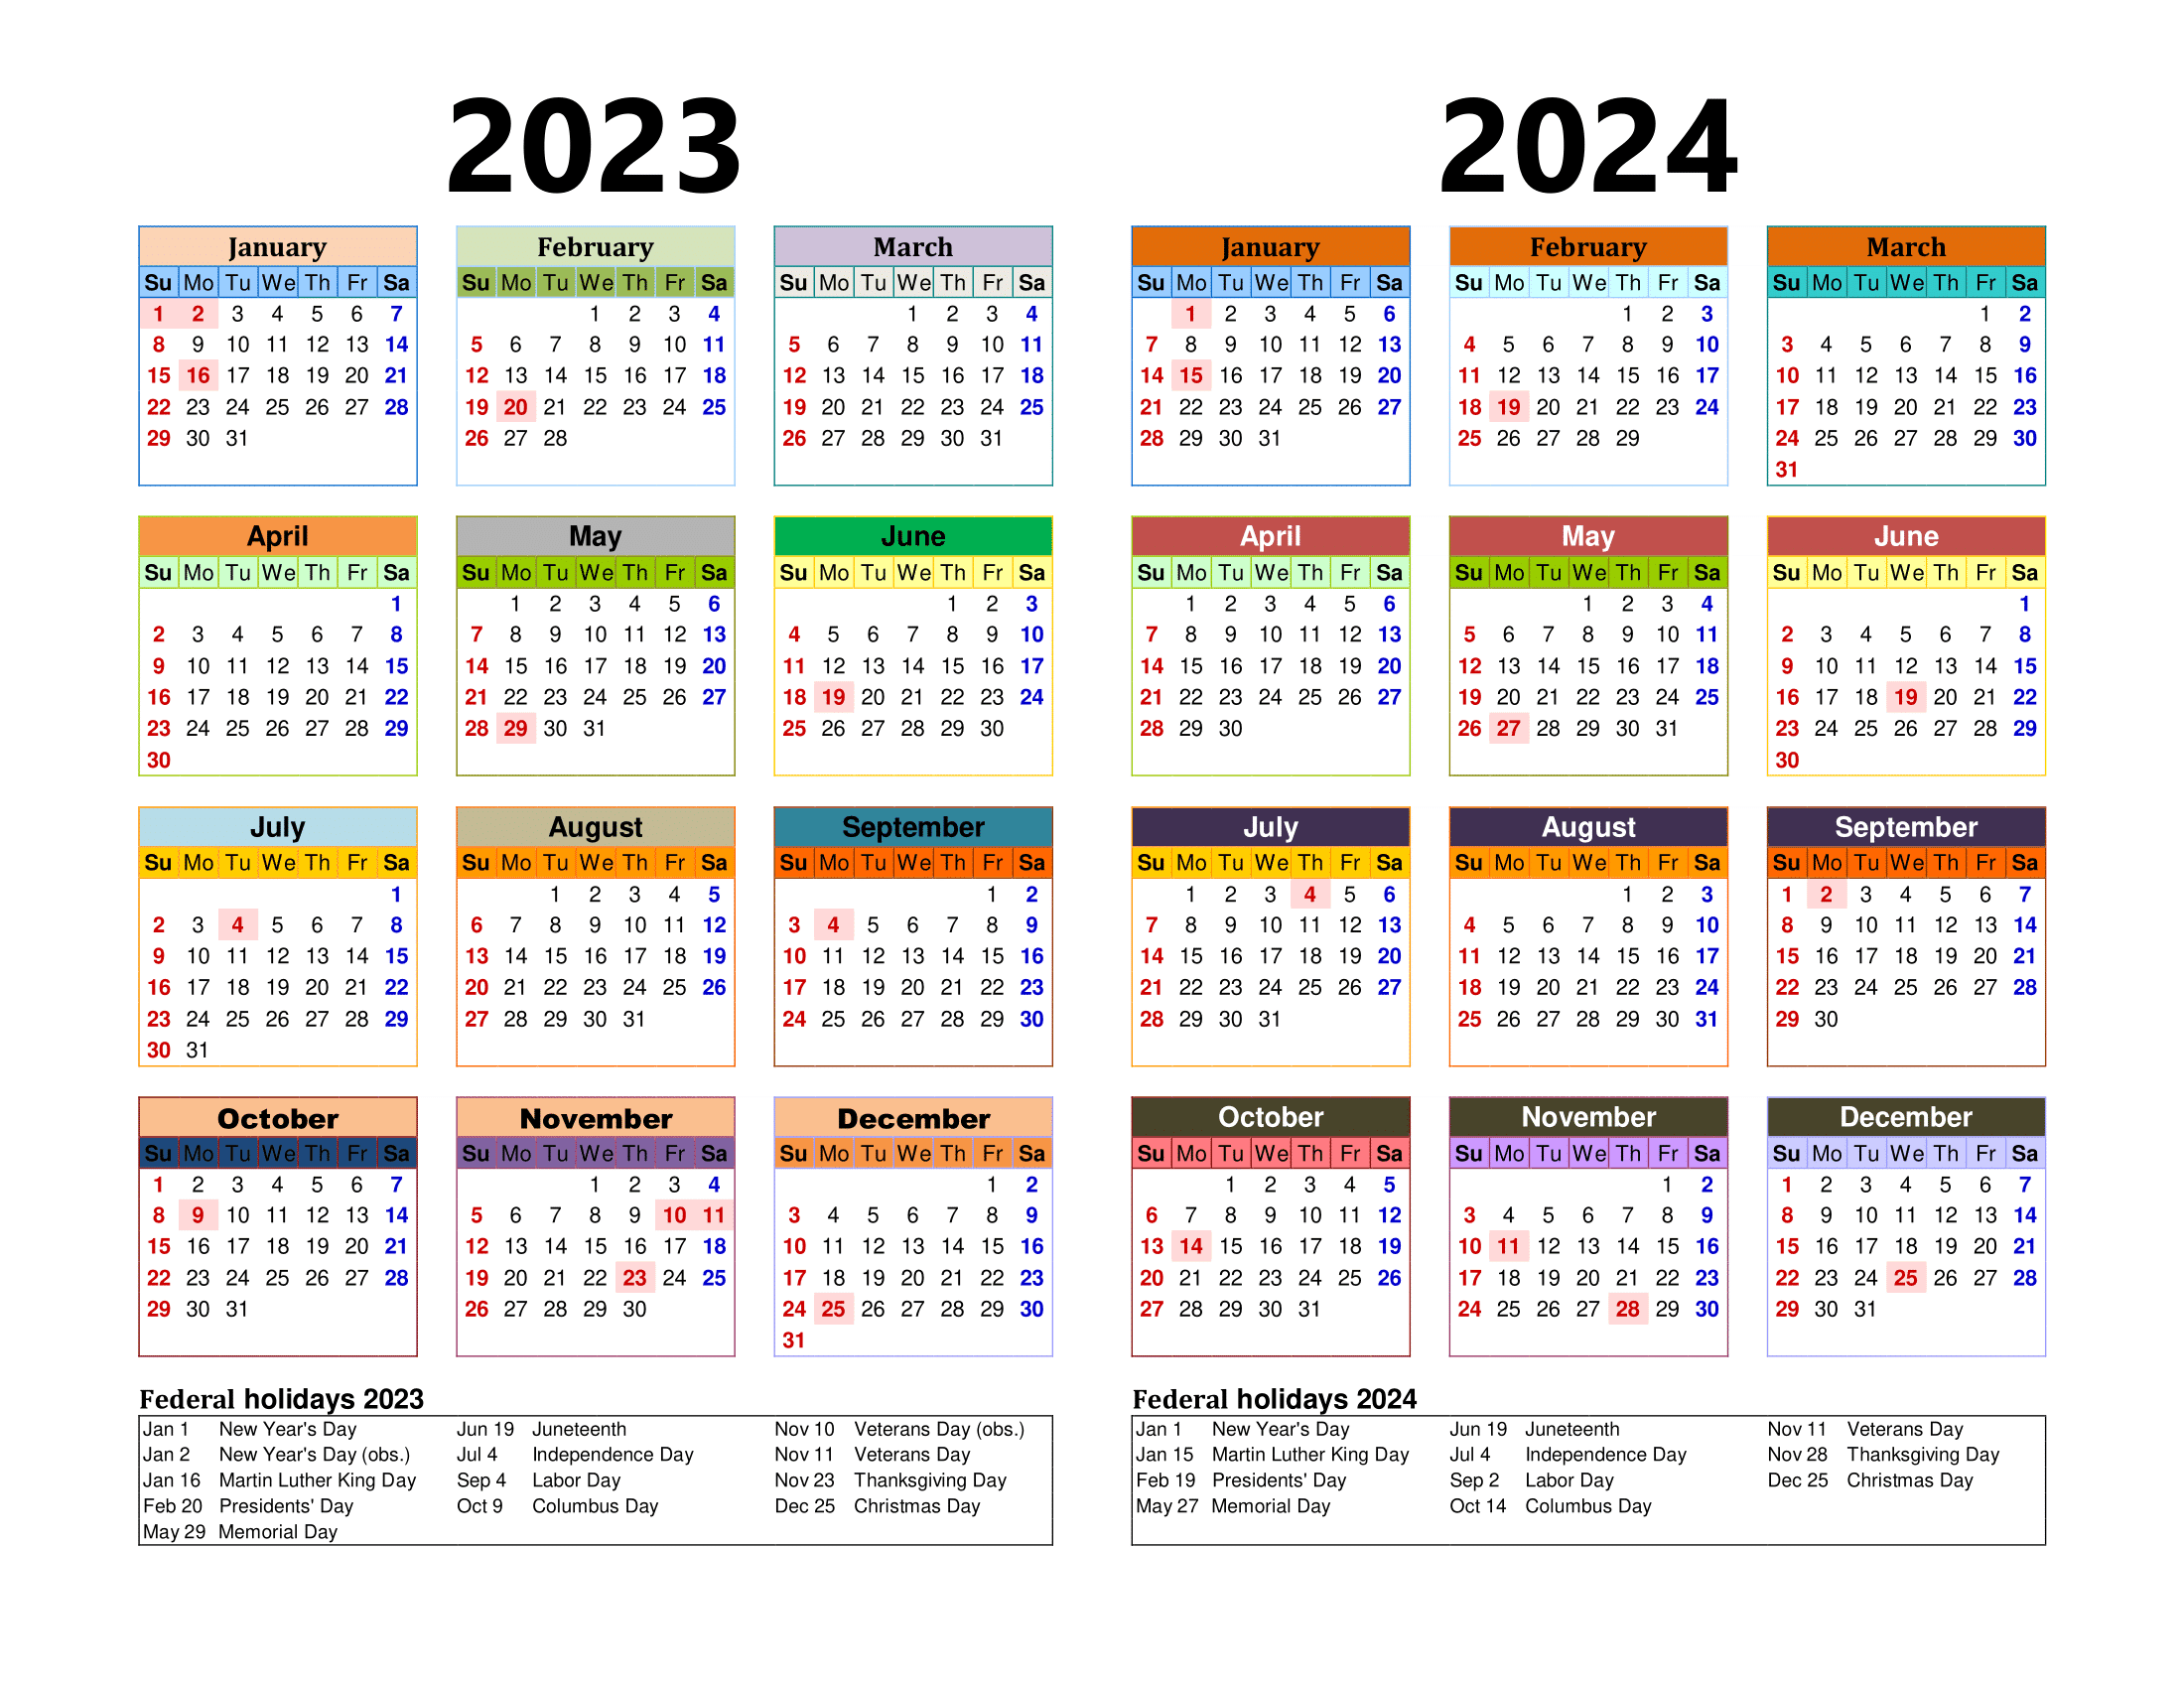 Free Printable Two Year Calendar Templates For 2023 And 2024 In Pdf for Printable Monthly Calendar 2023-2024